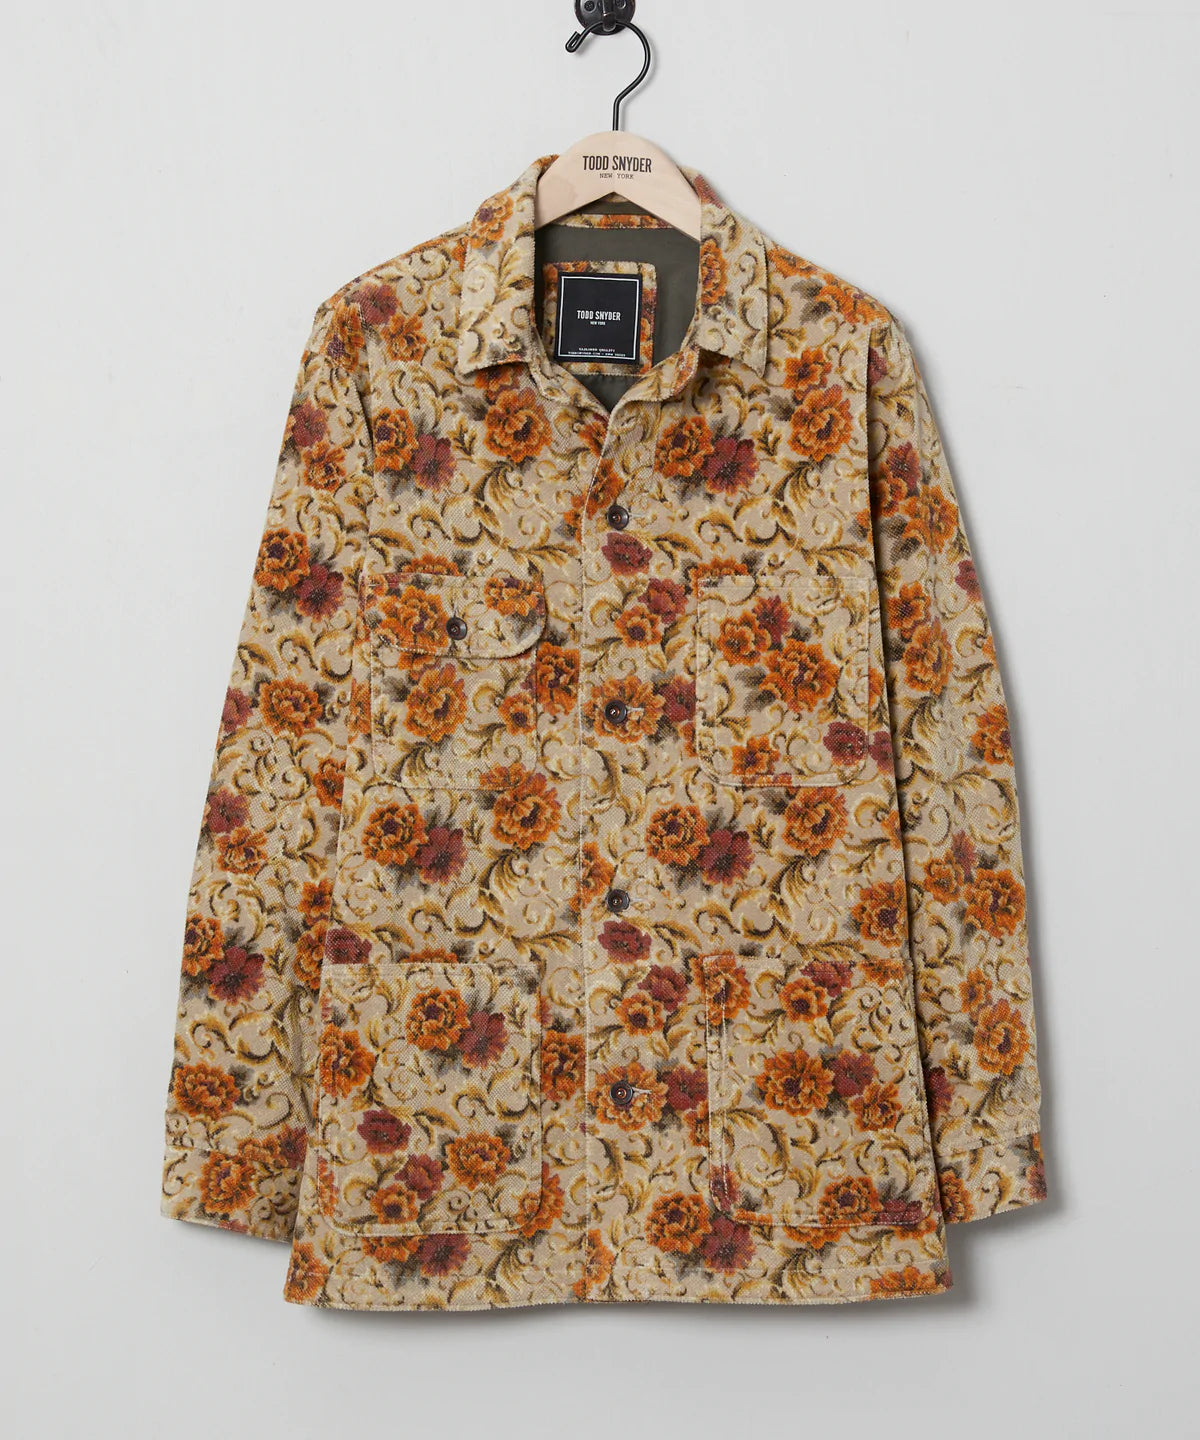 Todd Snyder - TODD SNYDER JAPANESE CORDUROY BARN JACKET IN CREAM FLORAL - Rent With Thred